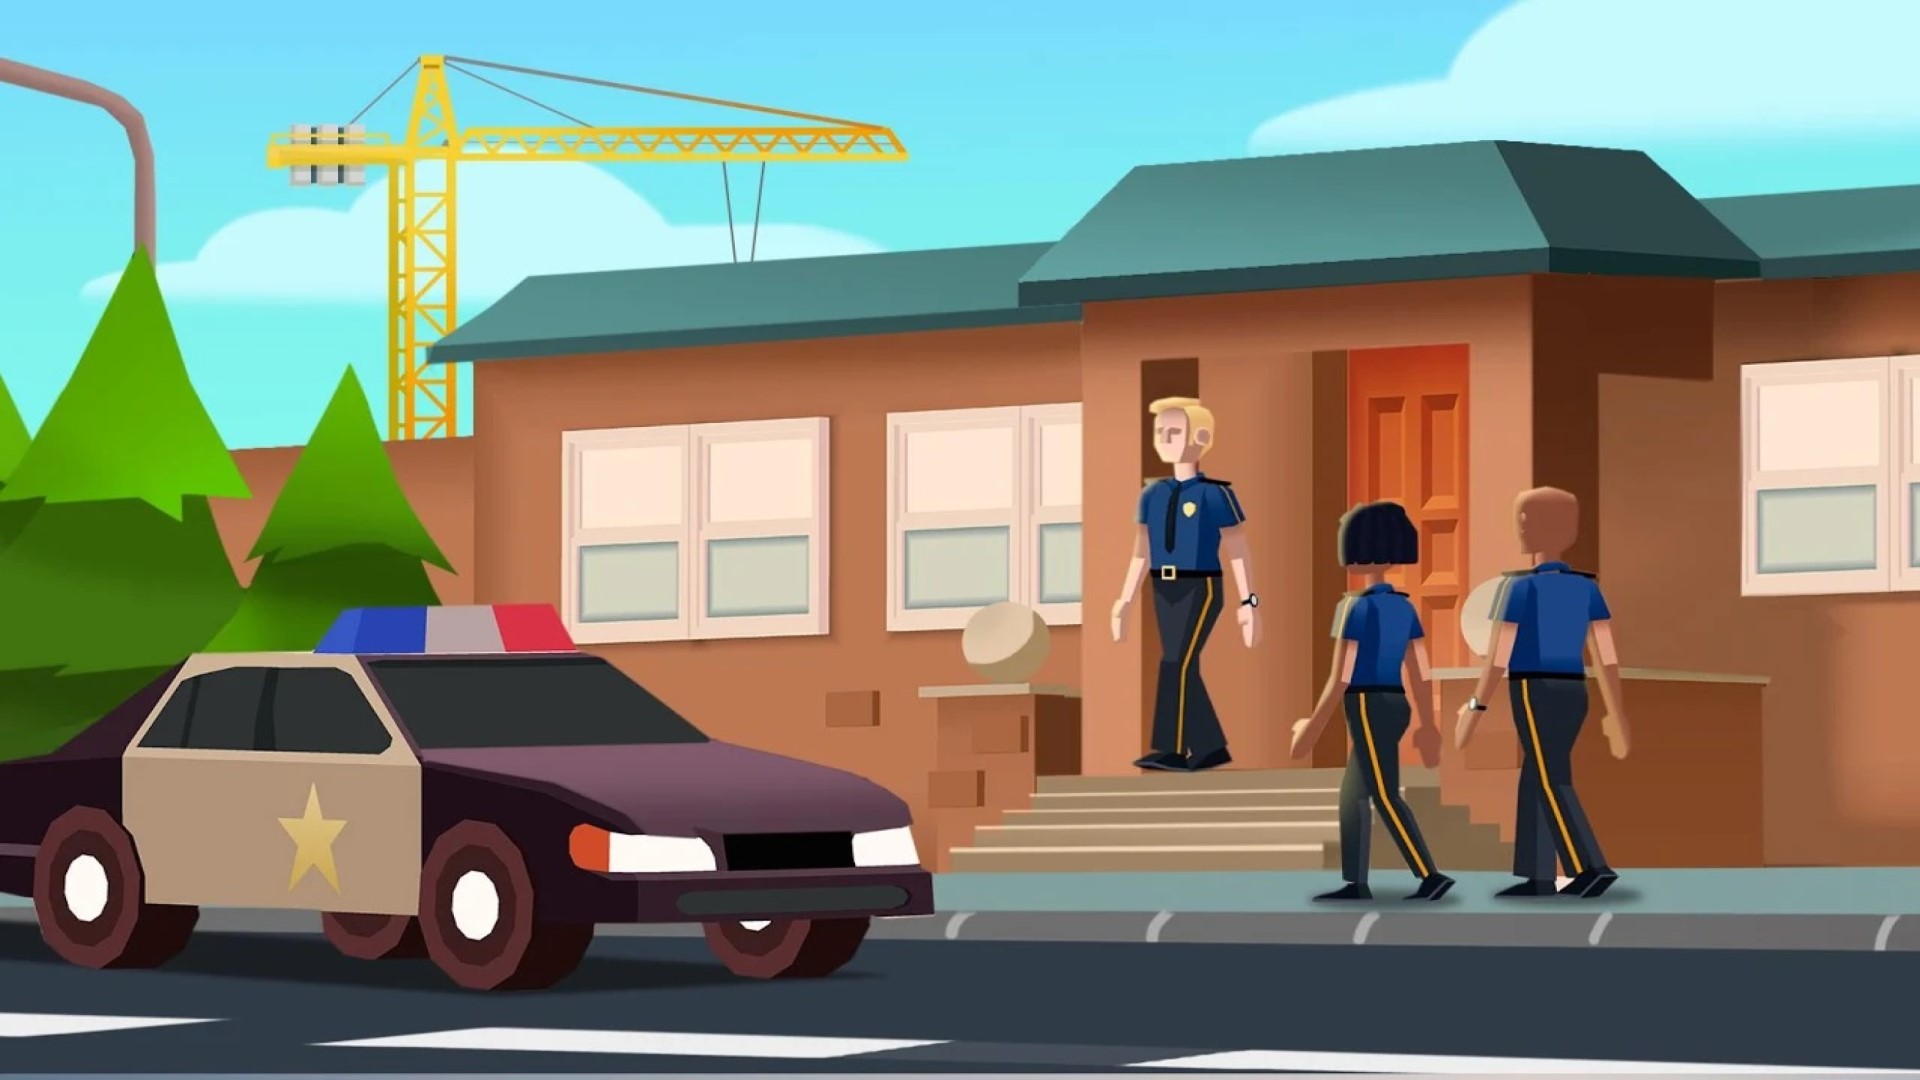 Best idle games: Idle Police Tycoon. Image shows two police officers outside a building near their car.